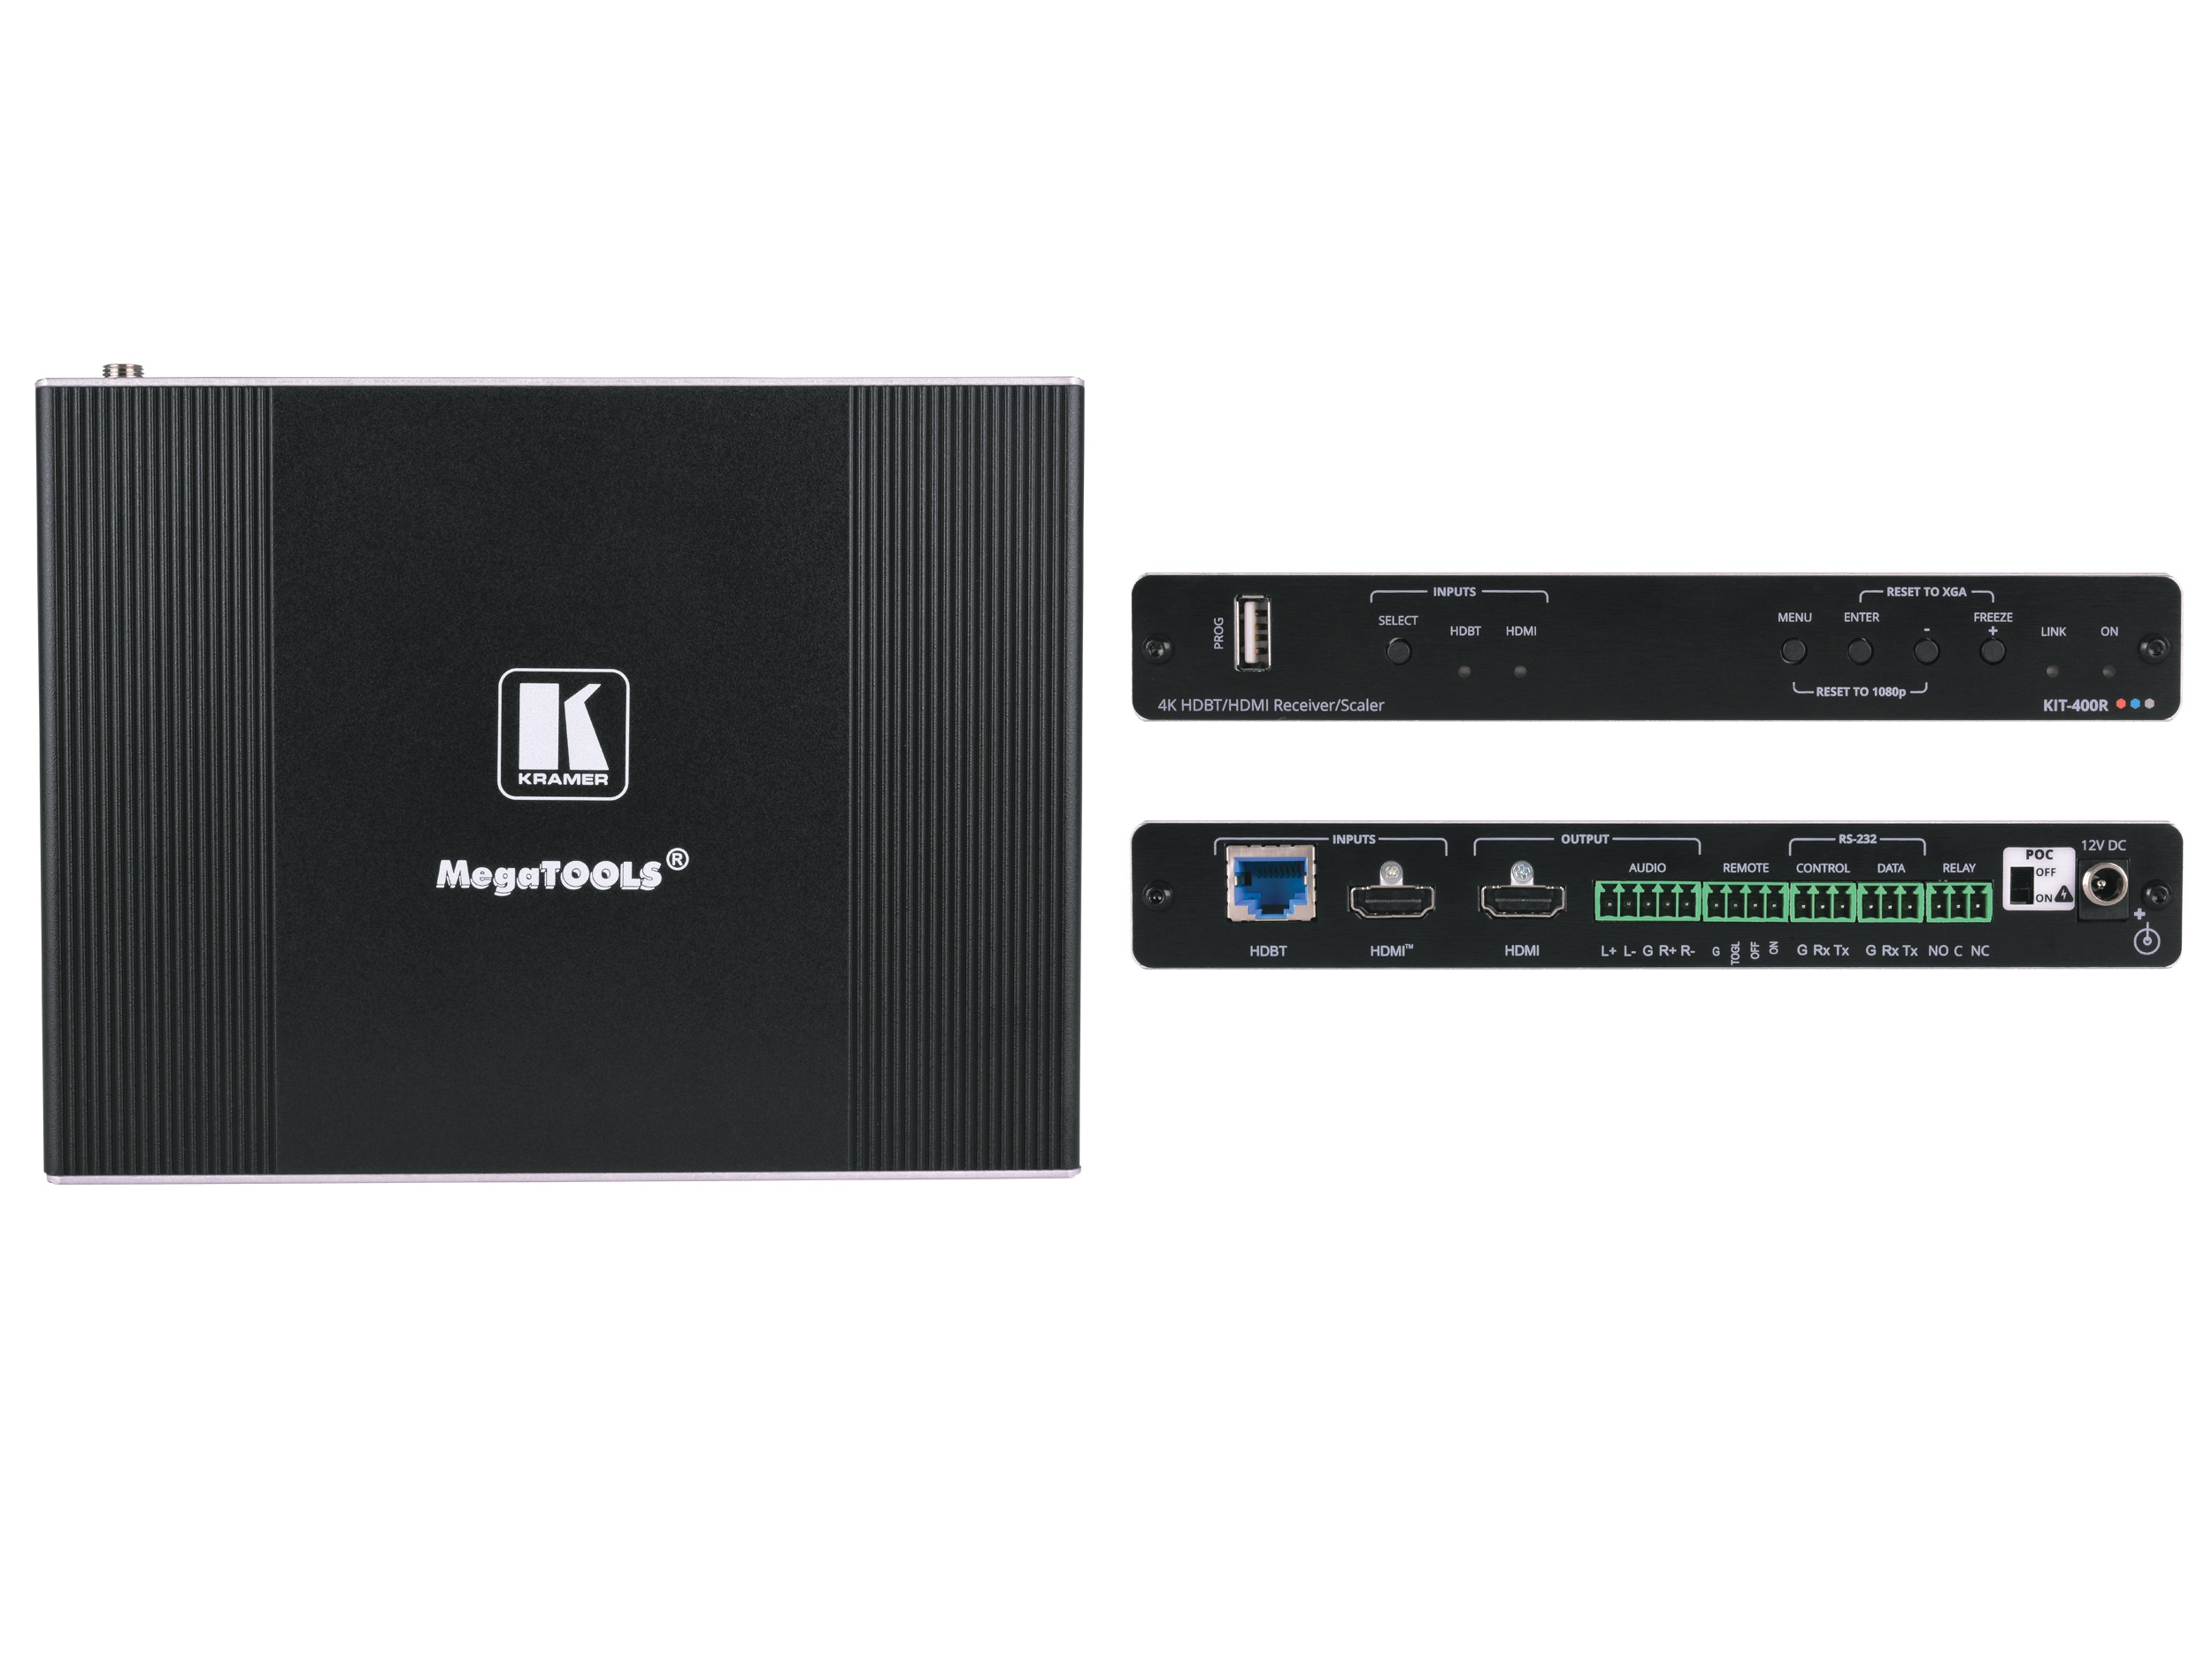 KIT-401/US-D(W) 4K Auto-Switcher/Scaler Kit over Long-Reach HDBaseT with White US-D Size Wall-Plate Frame by Kramer